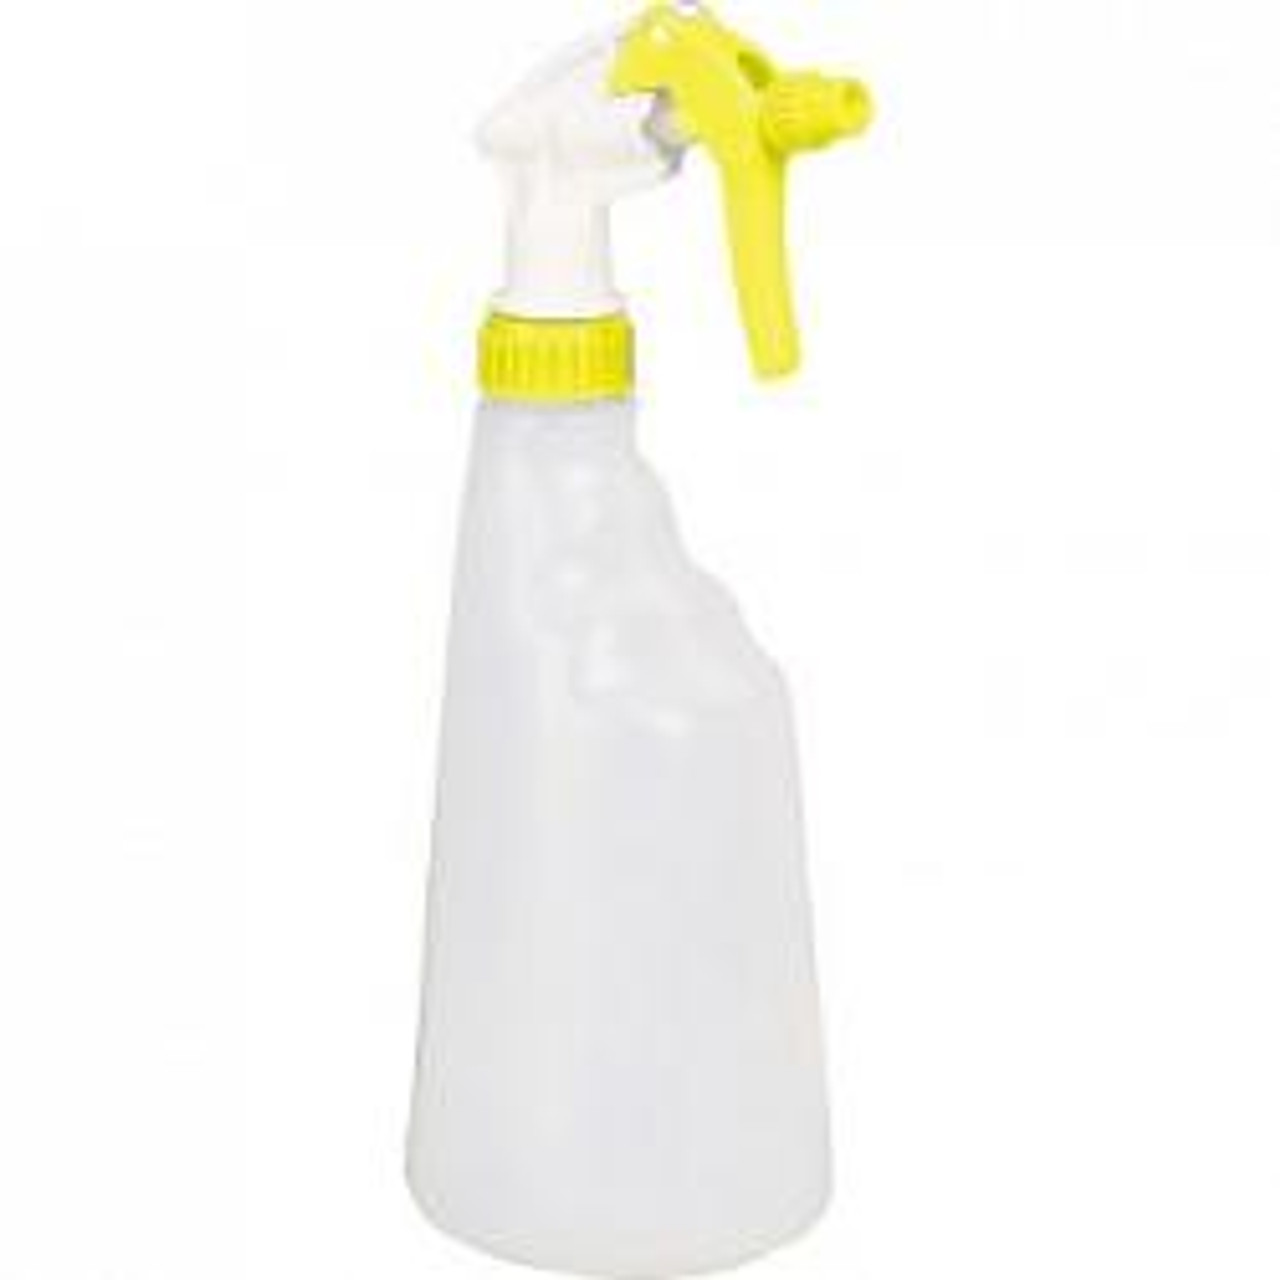 Colour Coded Trigger Spray Bottle - Yellow